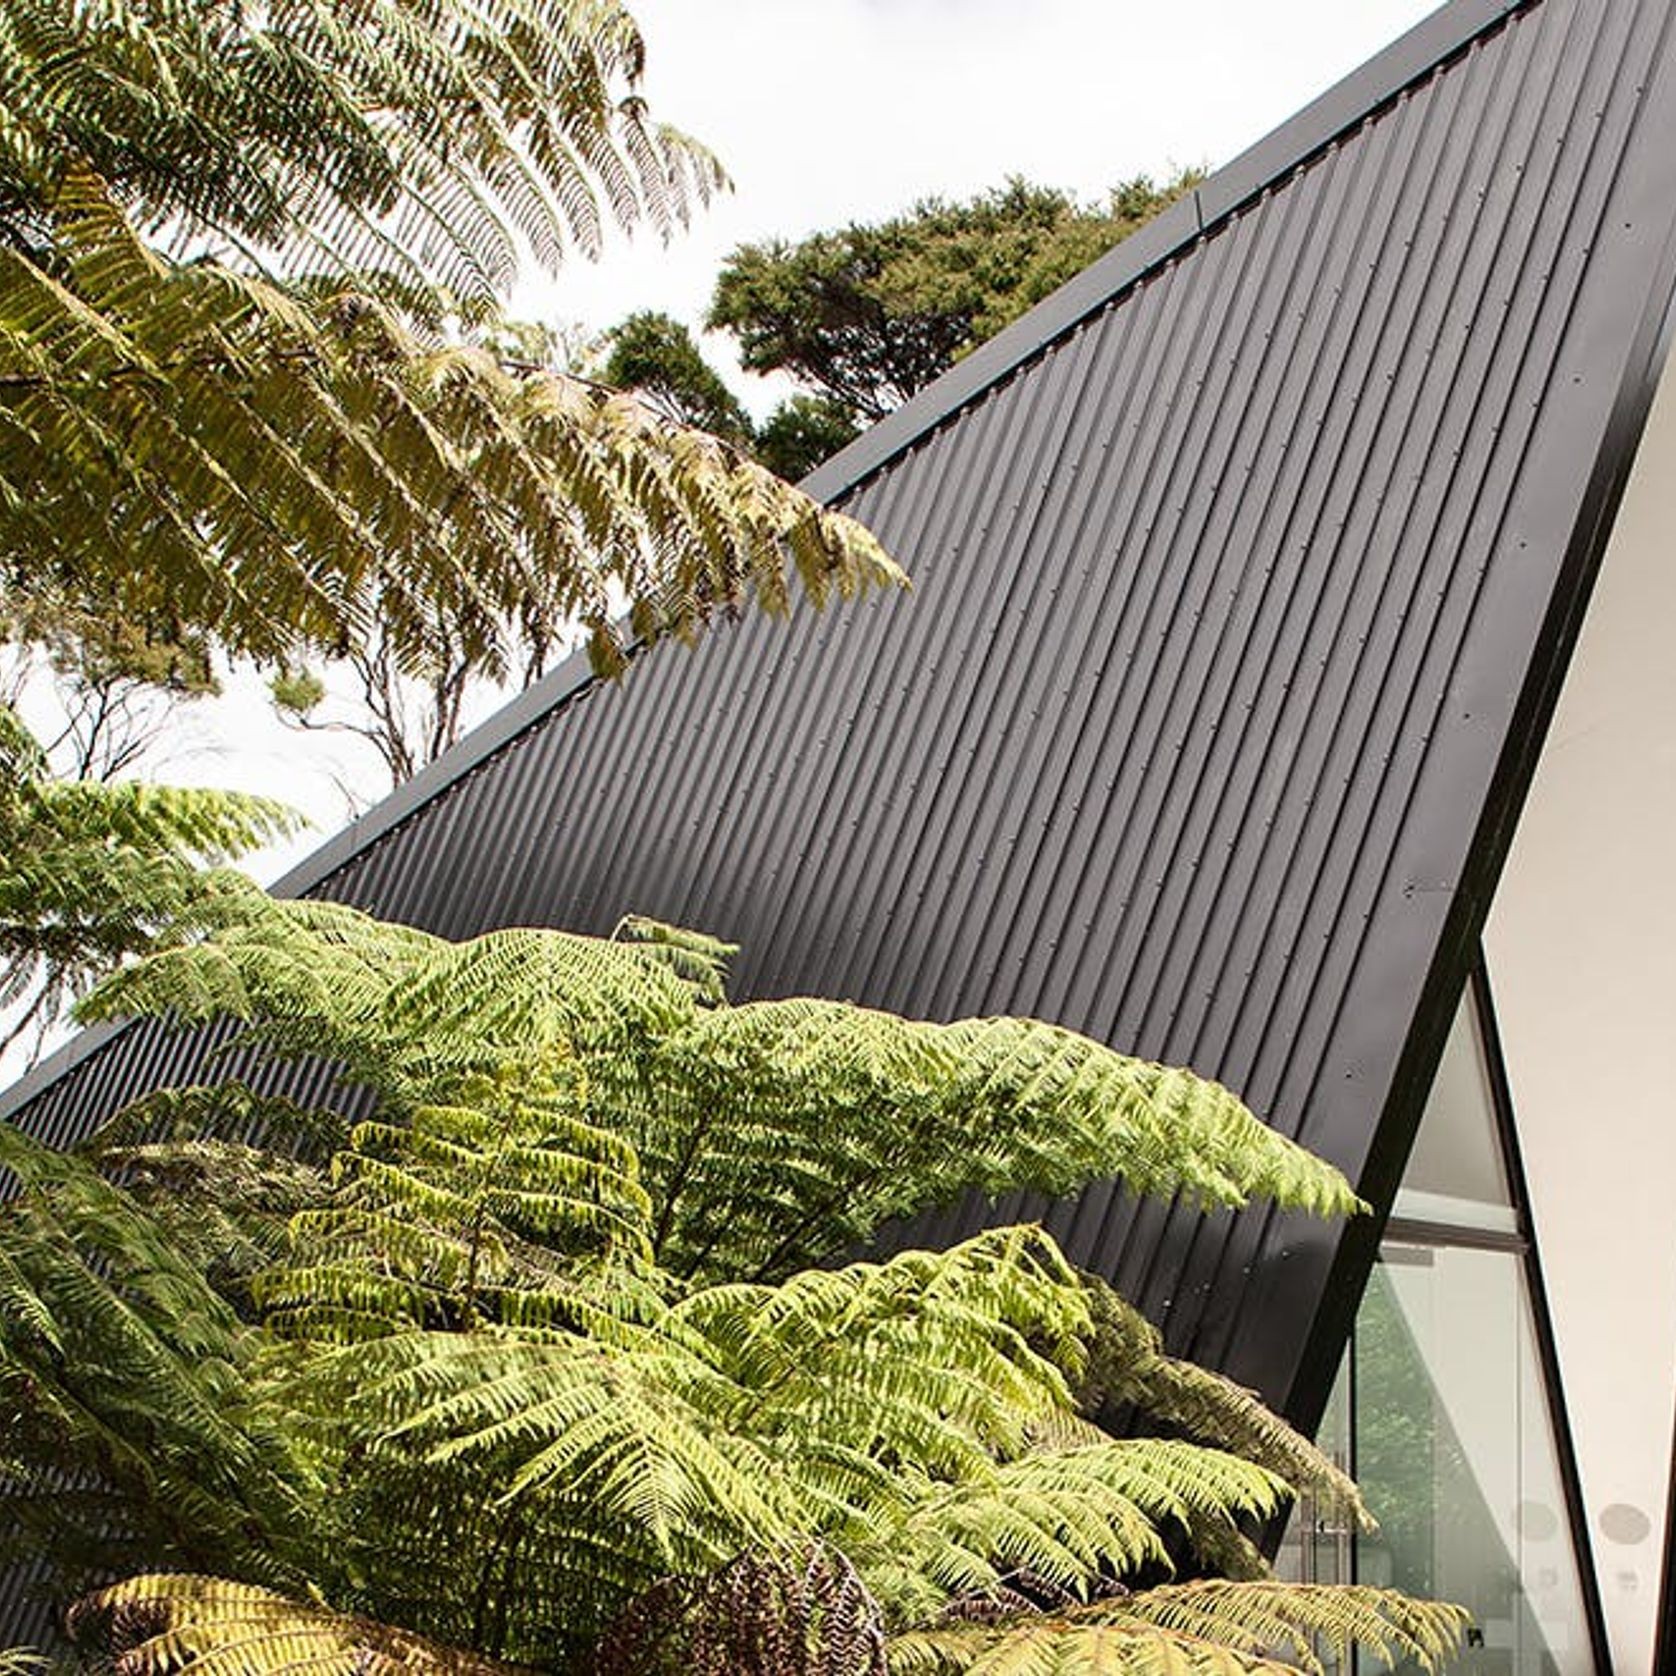 COLORSTEEL MAXX® Steel Roof & Wall Cladding gallery detail image